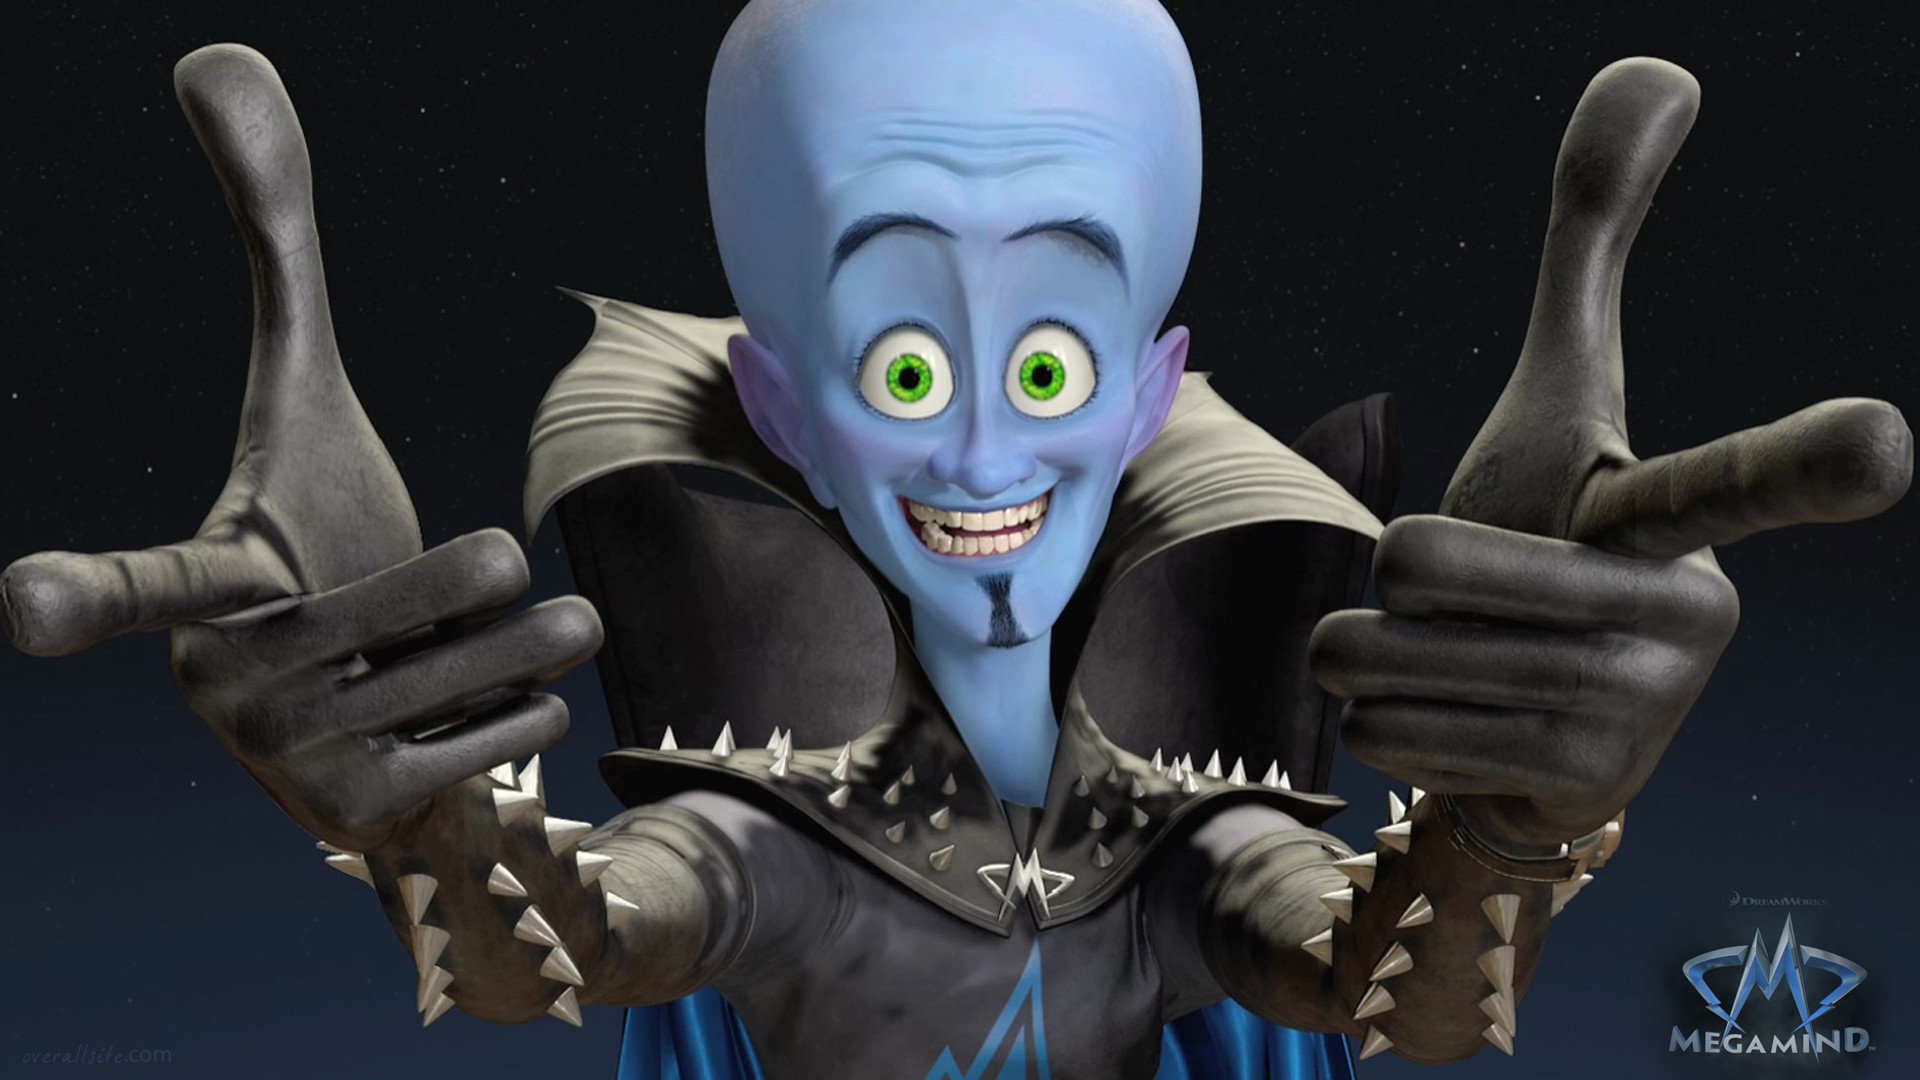 General 1920x1080 movies Megamind animated movies 2010 (Year)